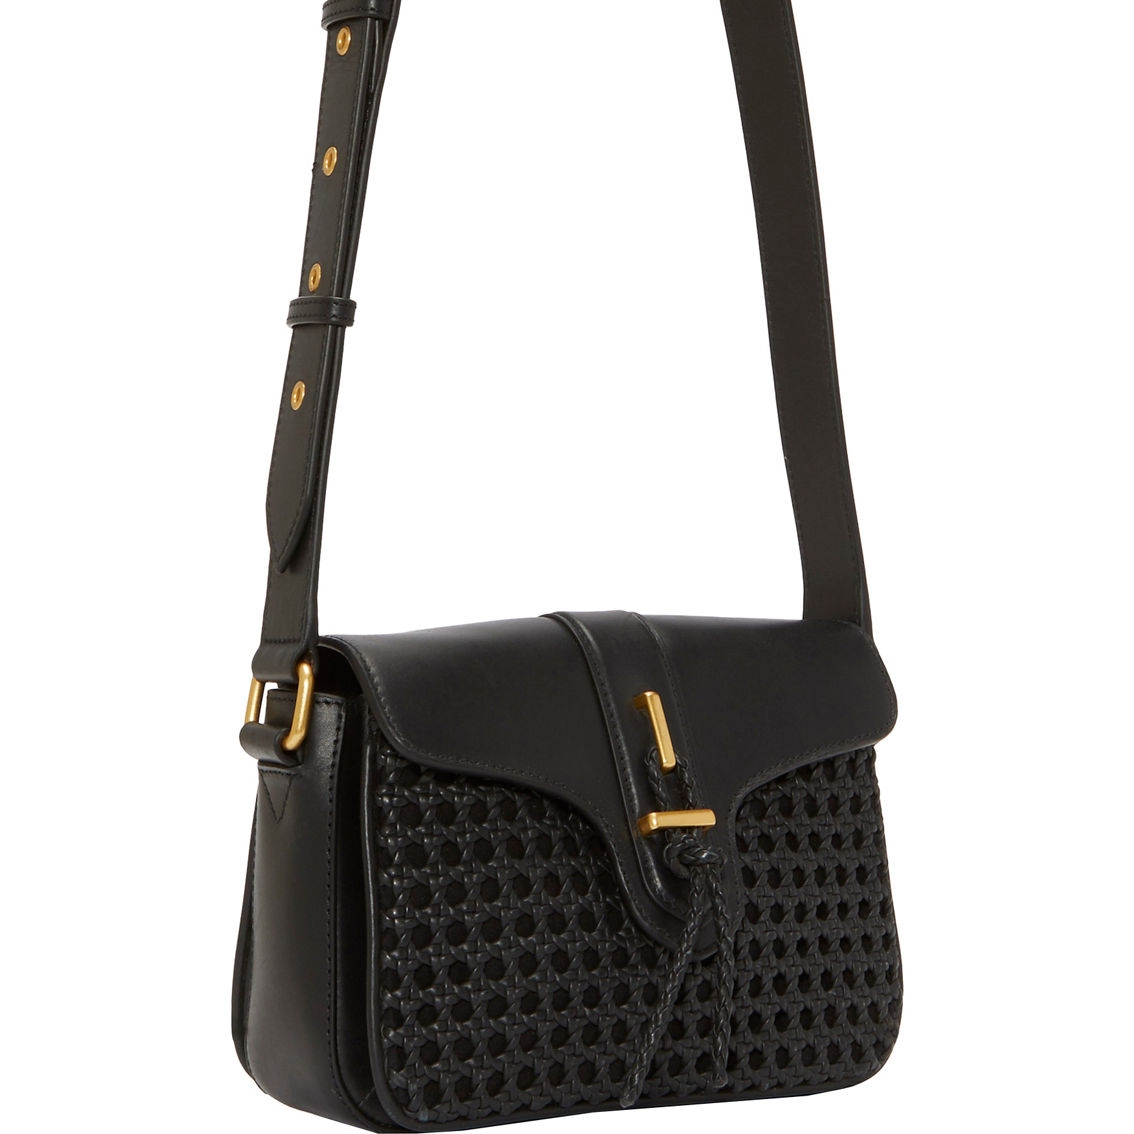 Vince Camuto Maecy Crossbody, Black - Image 2 of 4